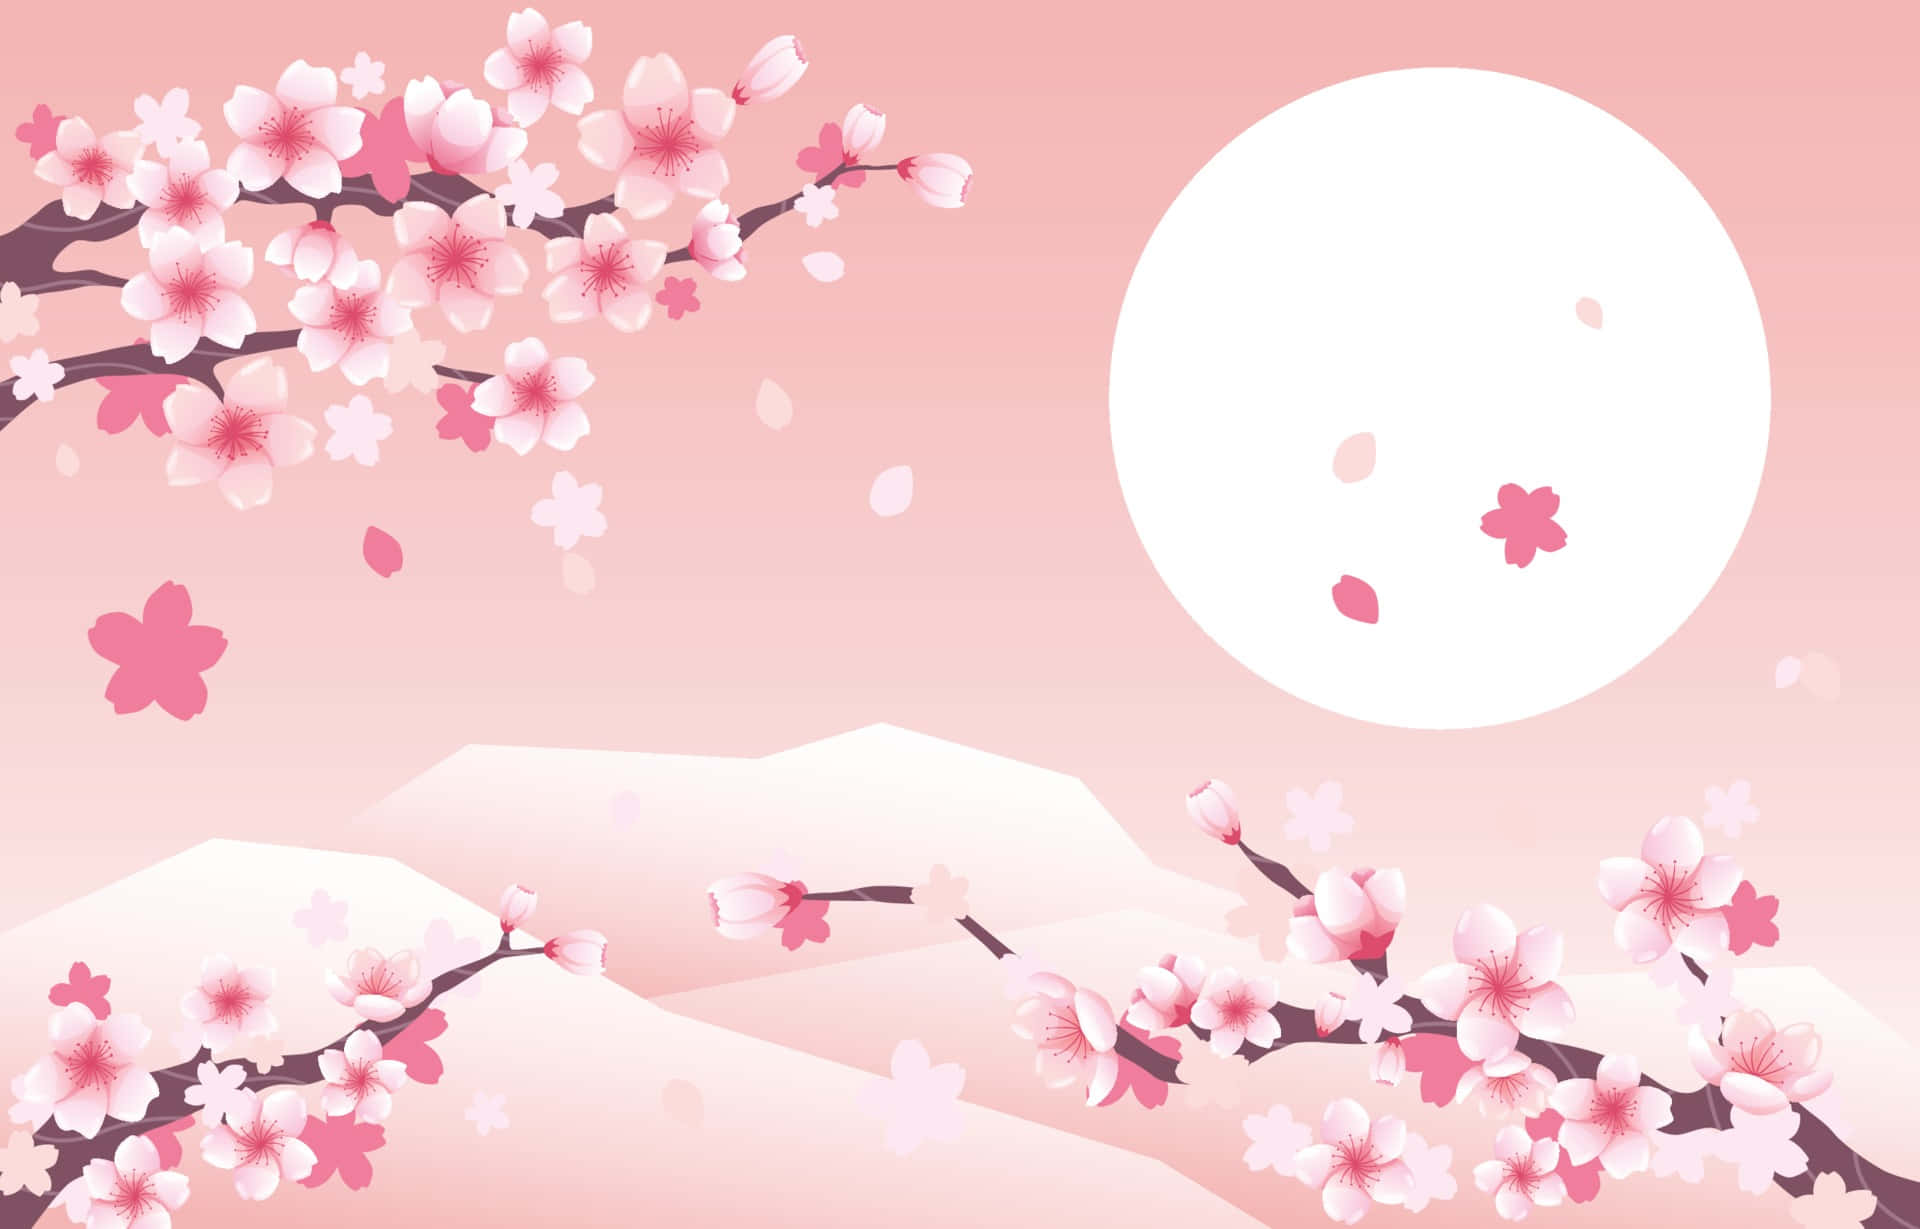 Caption: Blossom Bliss - A Serene Field Of Beautiful Pink Blossoms Under The Sooting Blue Sky.